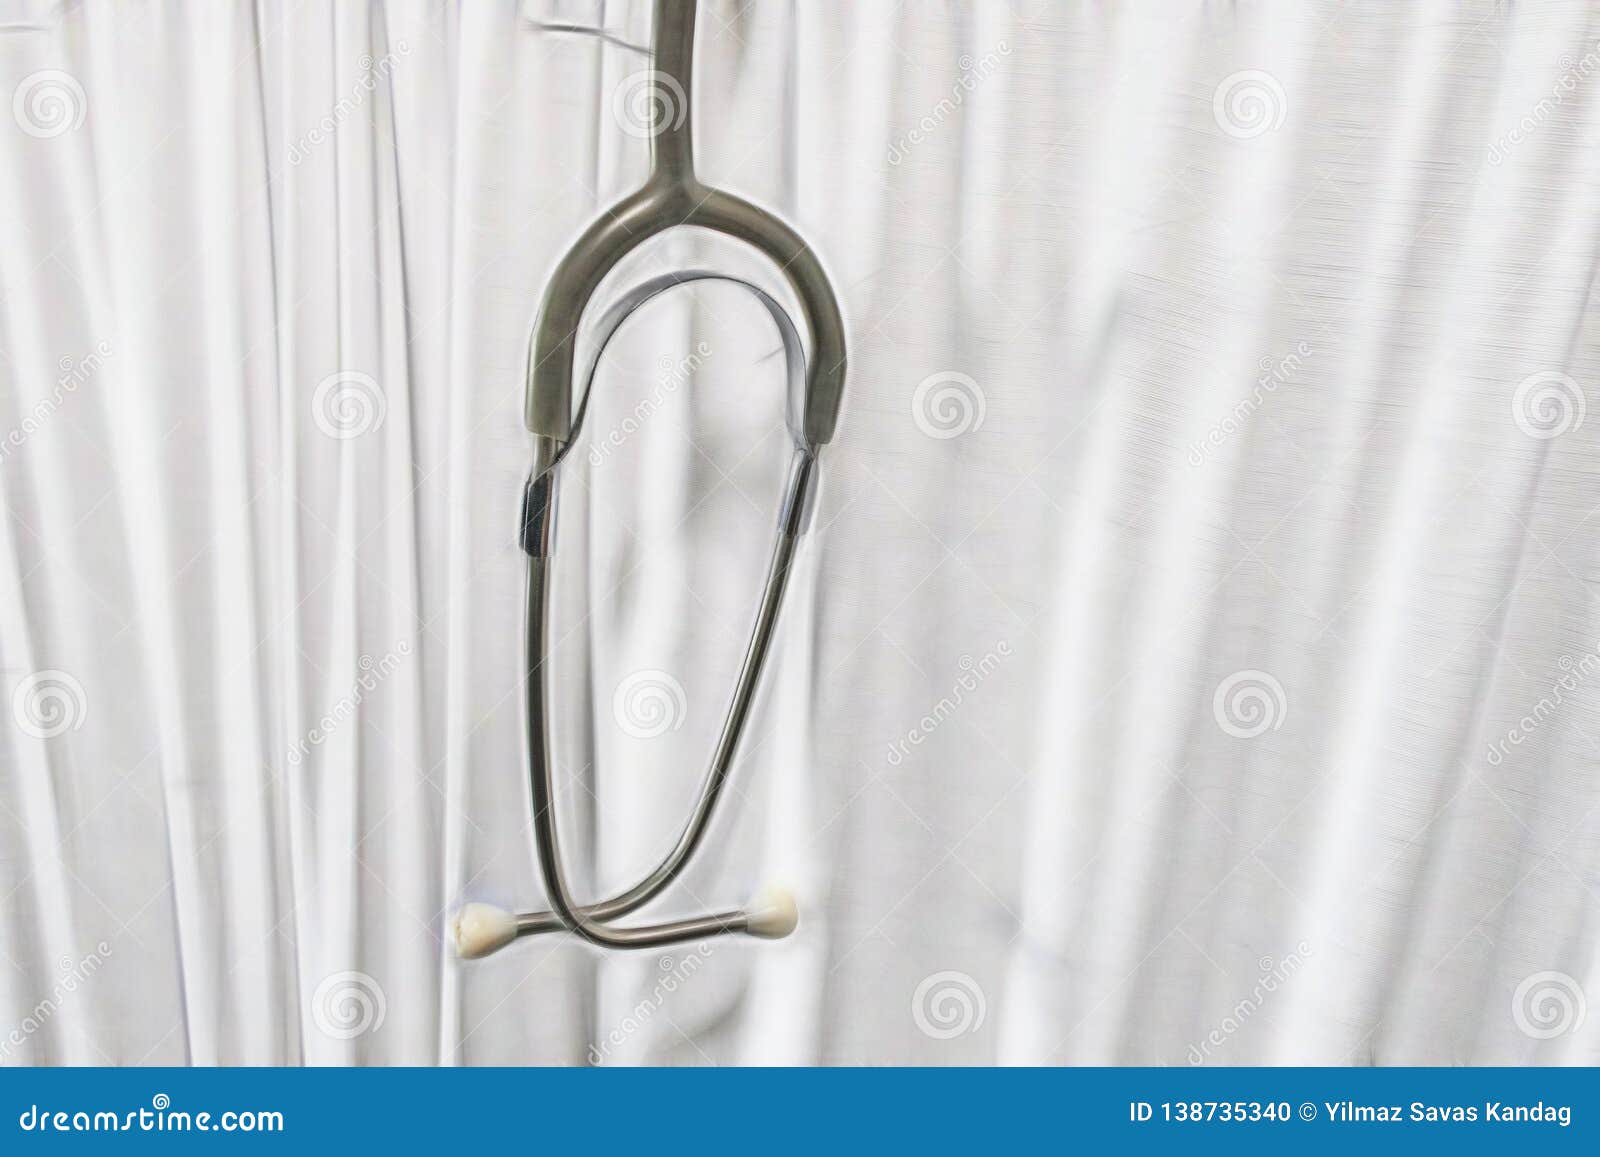 Stethoscope For Doctors And Patient Examination Stock Photo Image Of